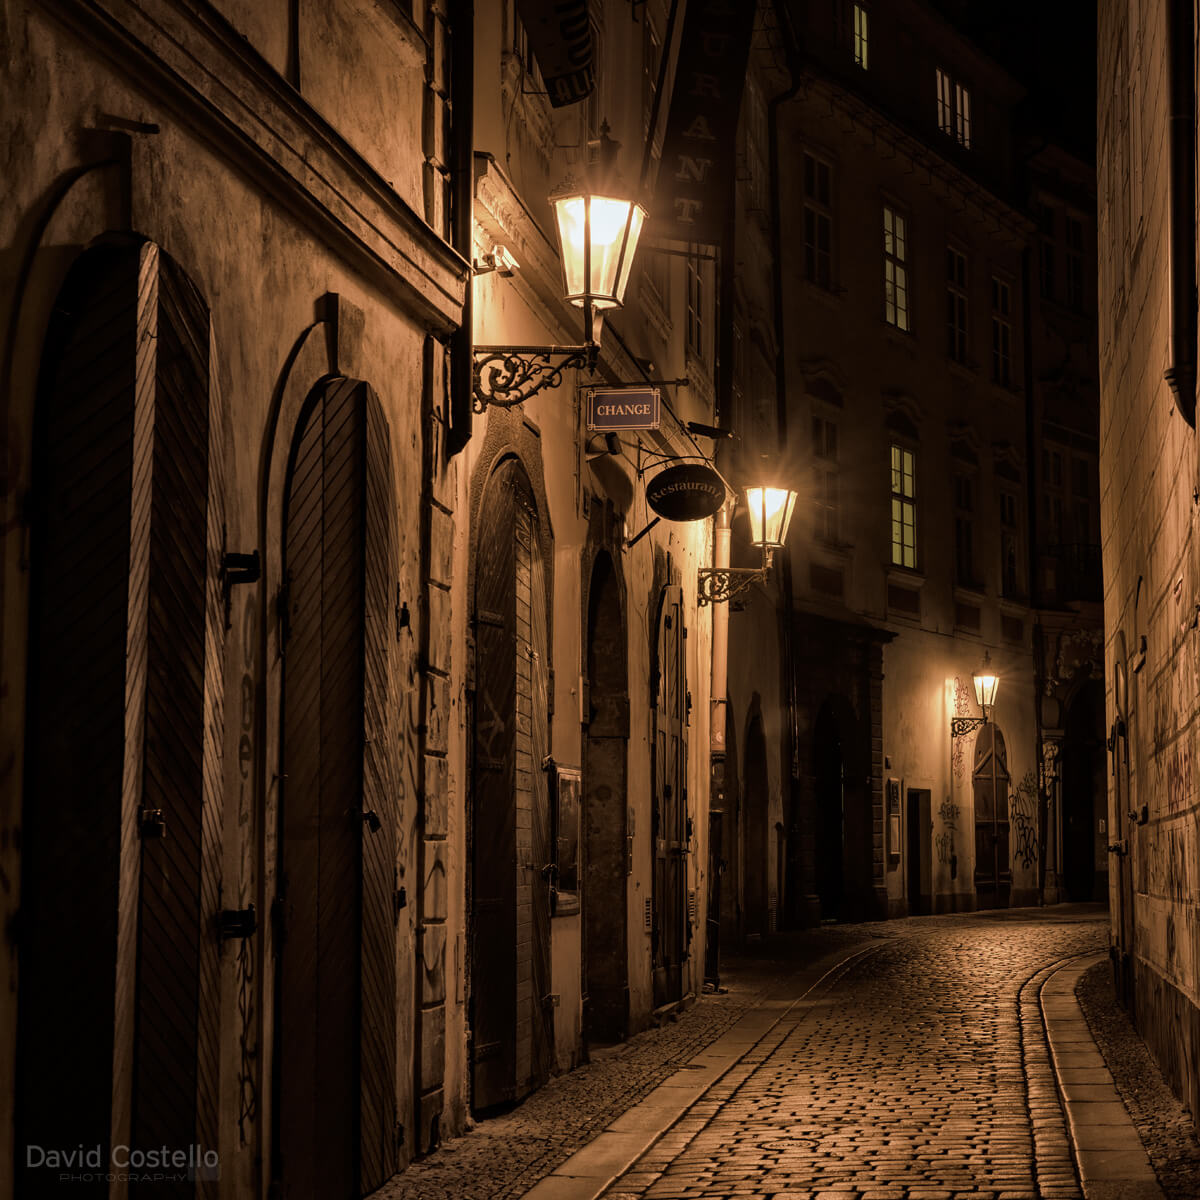 A quiet night scene in the bustling city of Prague, along this 14th century street a warm glow from the vintage street lamps hid the cold February night from view.